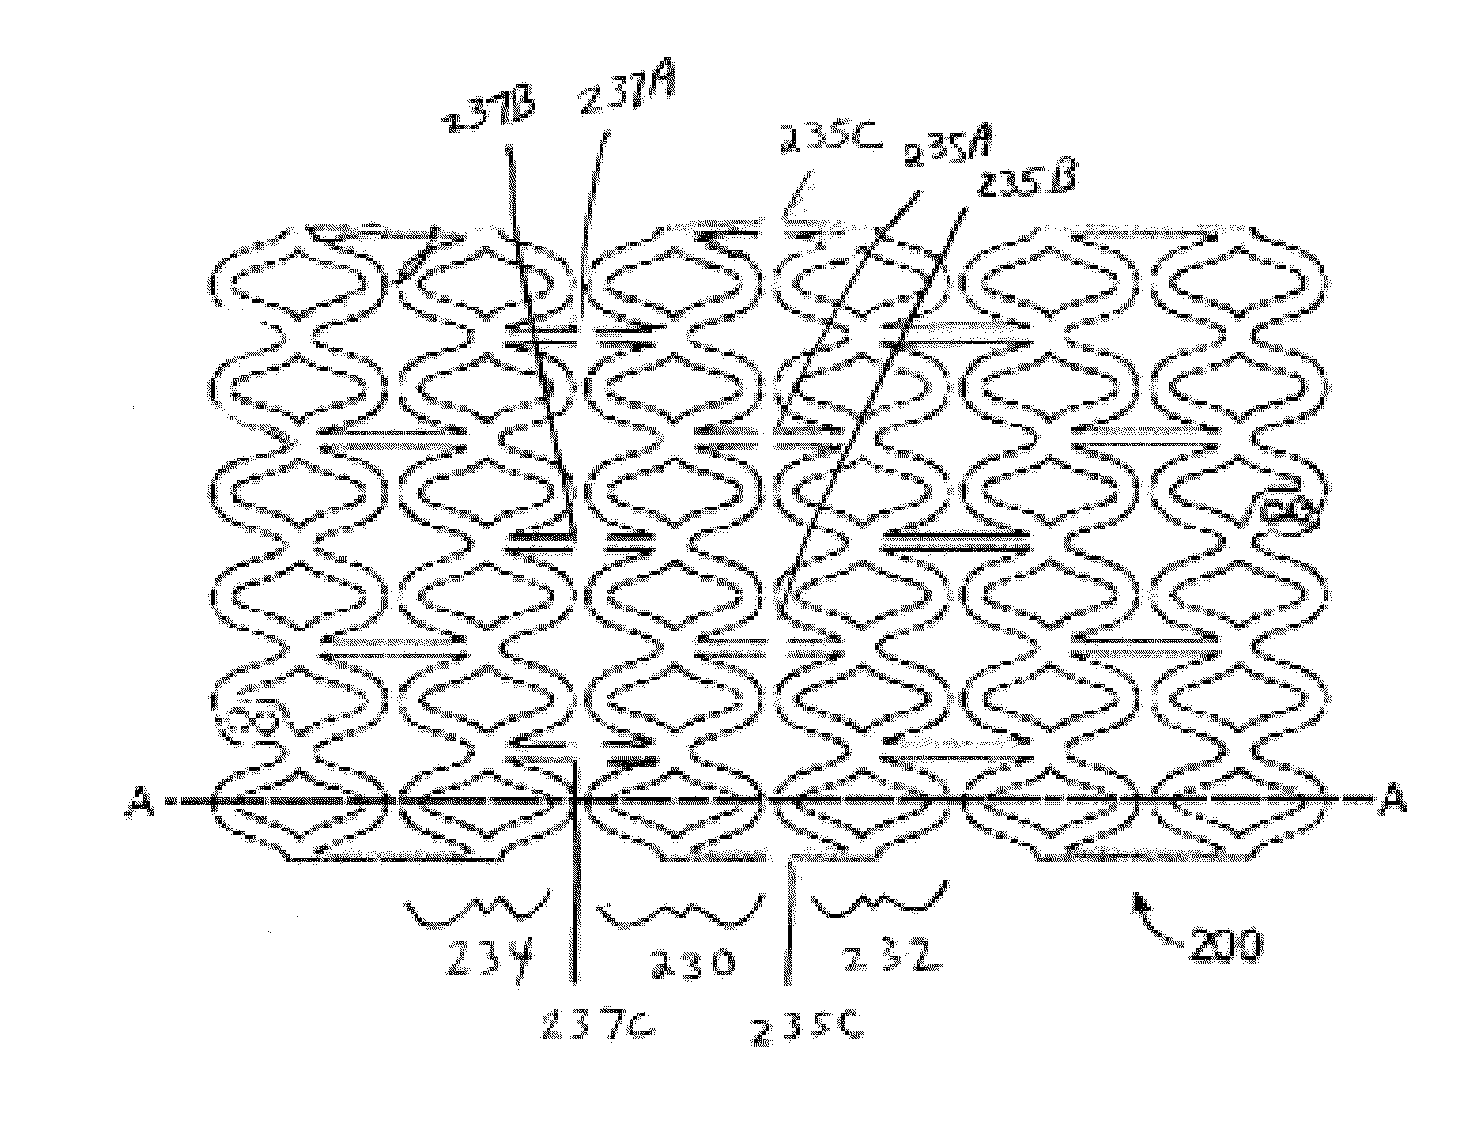 Method of treatment with a bioabsorbable stent with time dependent structure and properties and regio-selective degradation